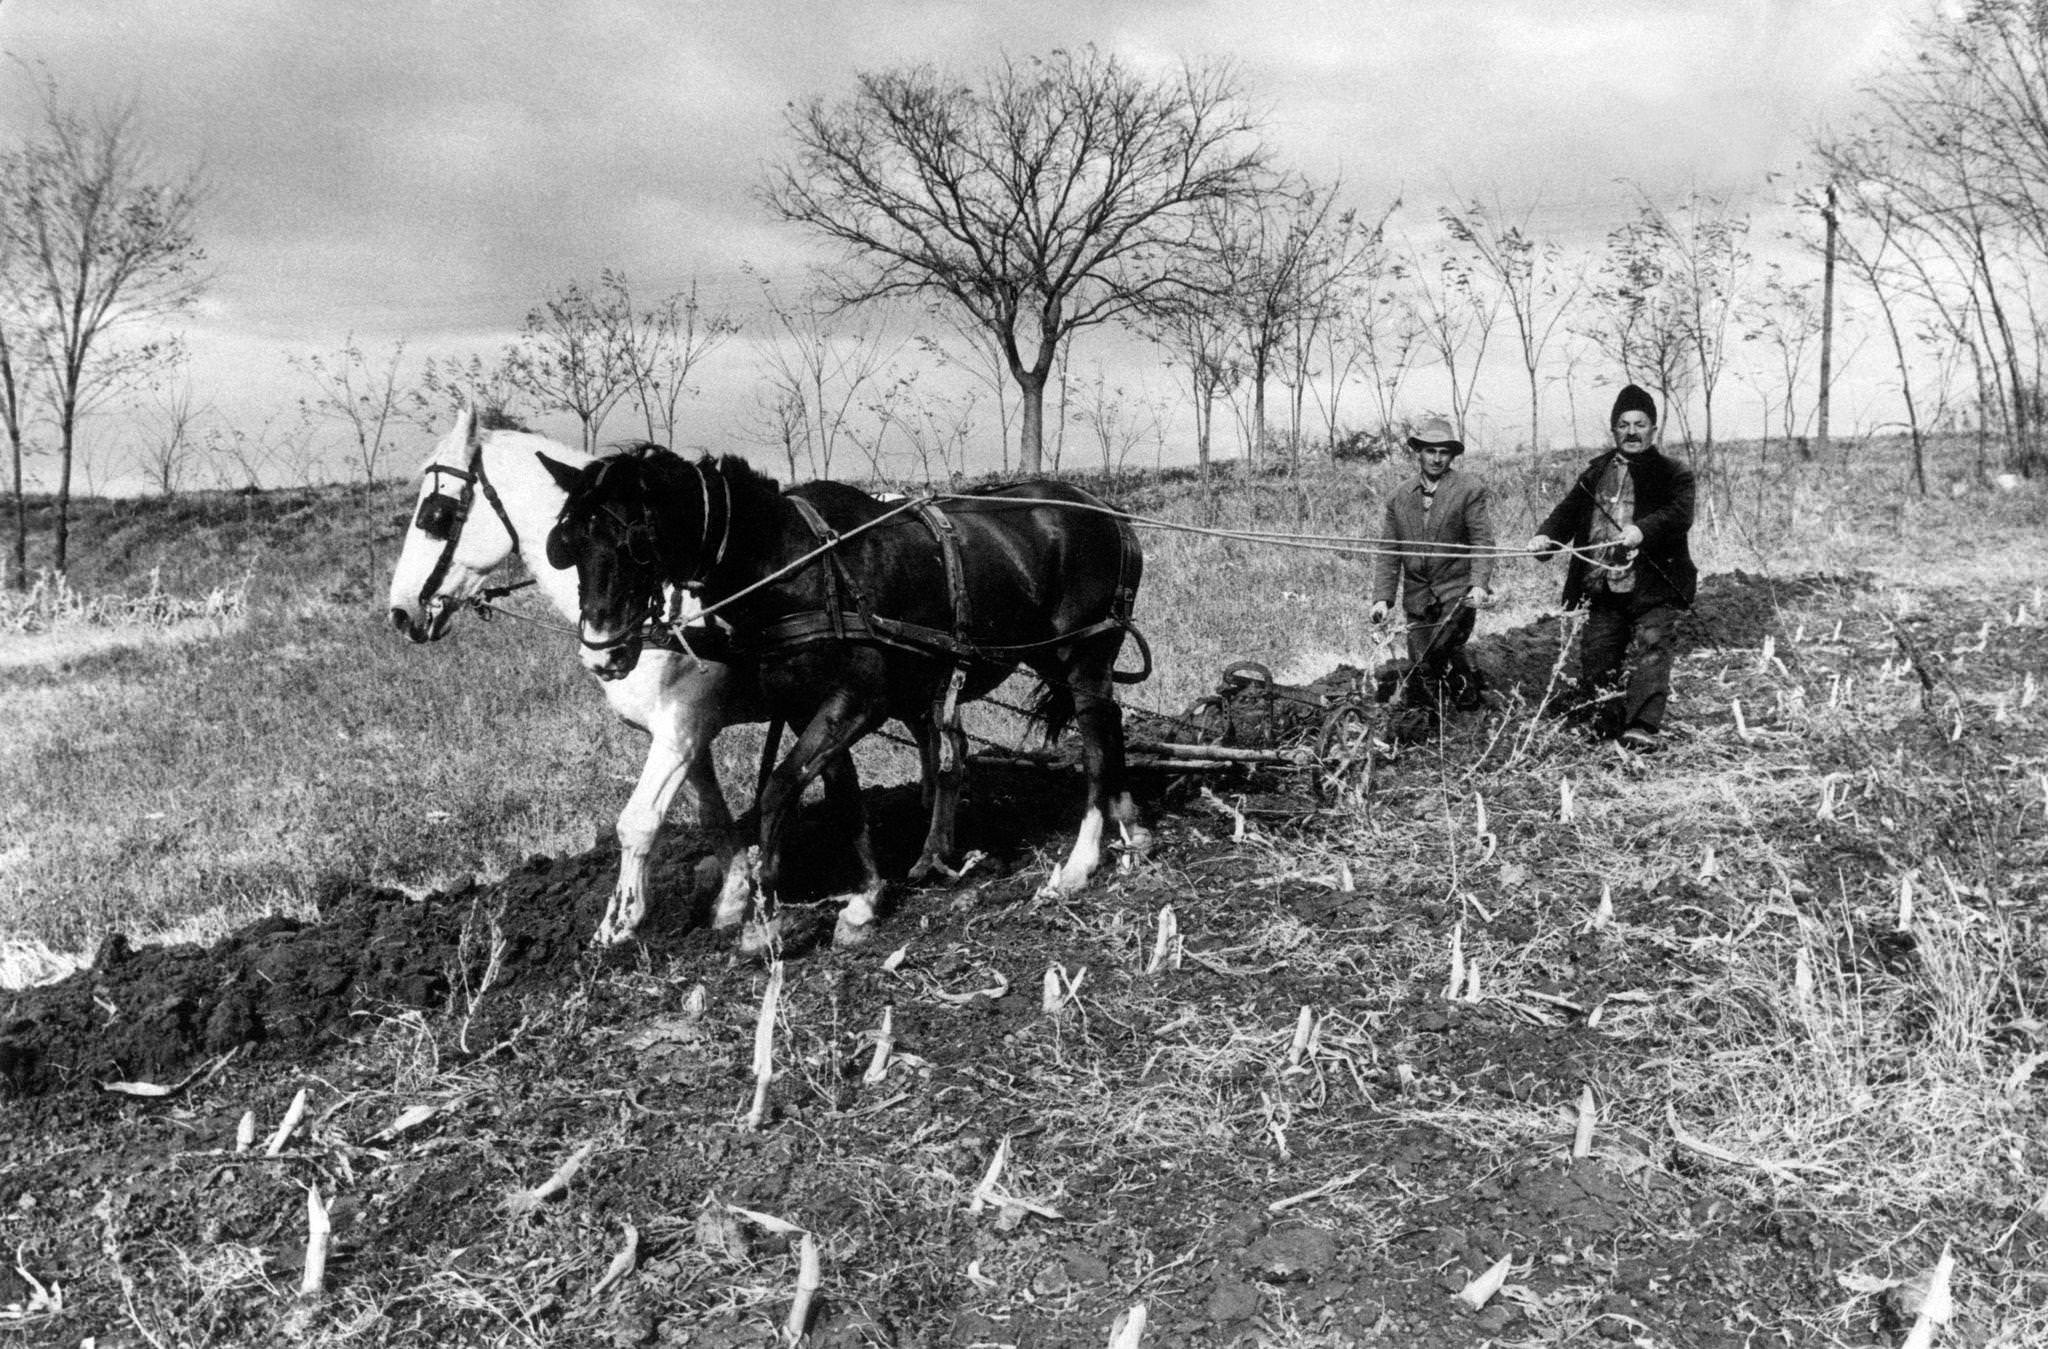 Two farmers plough a field with a ploughshare dragged by two horses, 20 km far from the capital city of Belgrade, Serbia, 1965